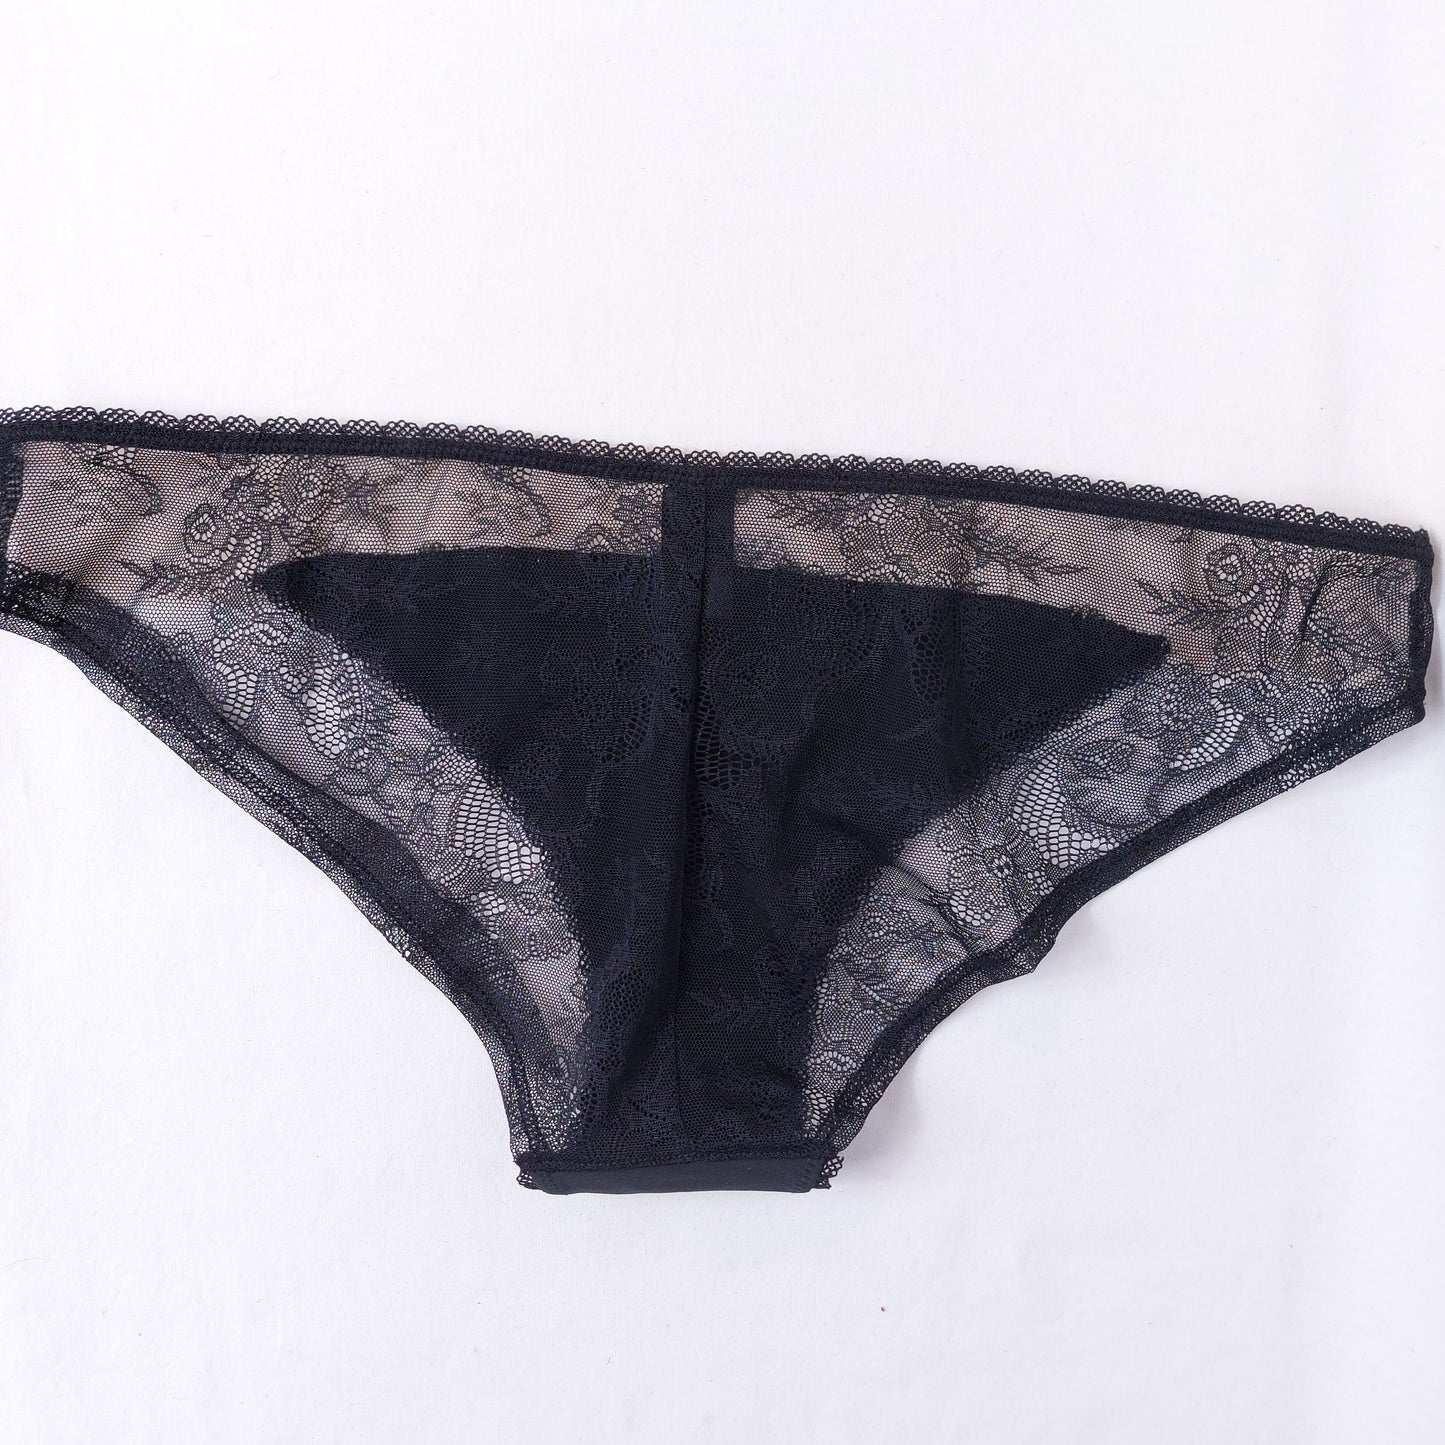 Black Cream Lace Brief Knickers 3xPairs